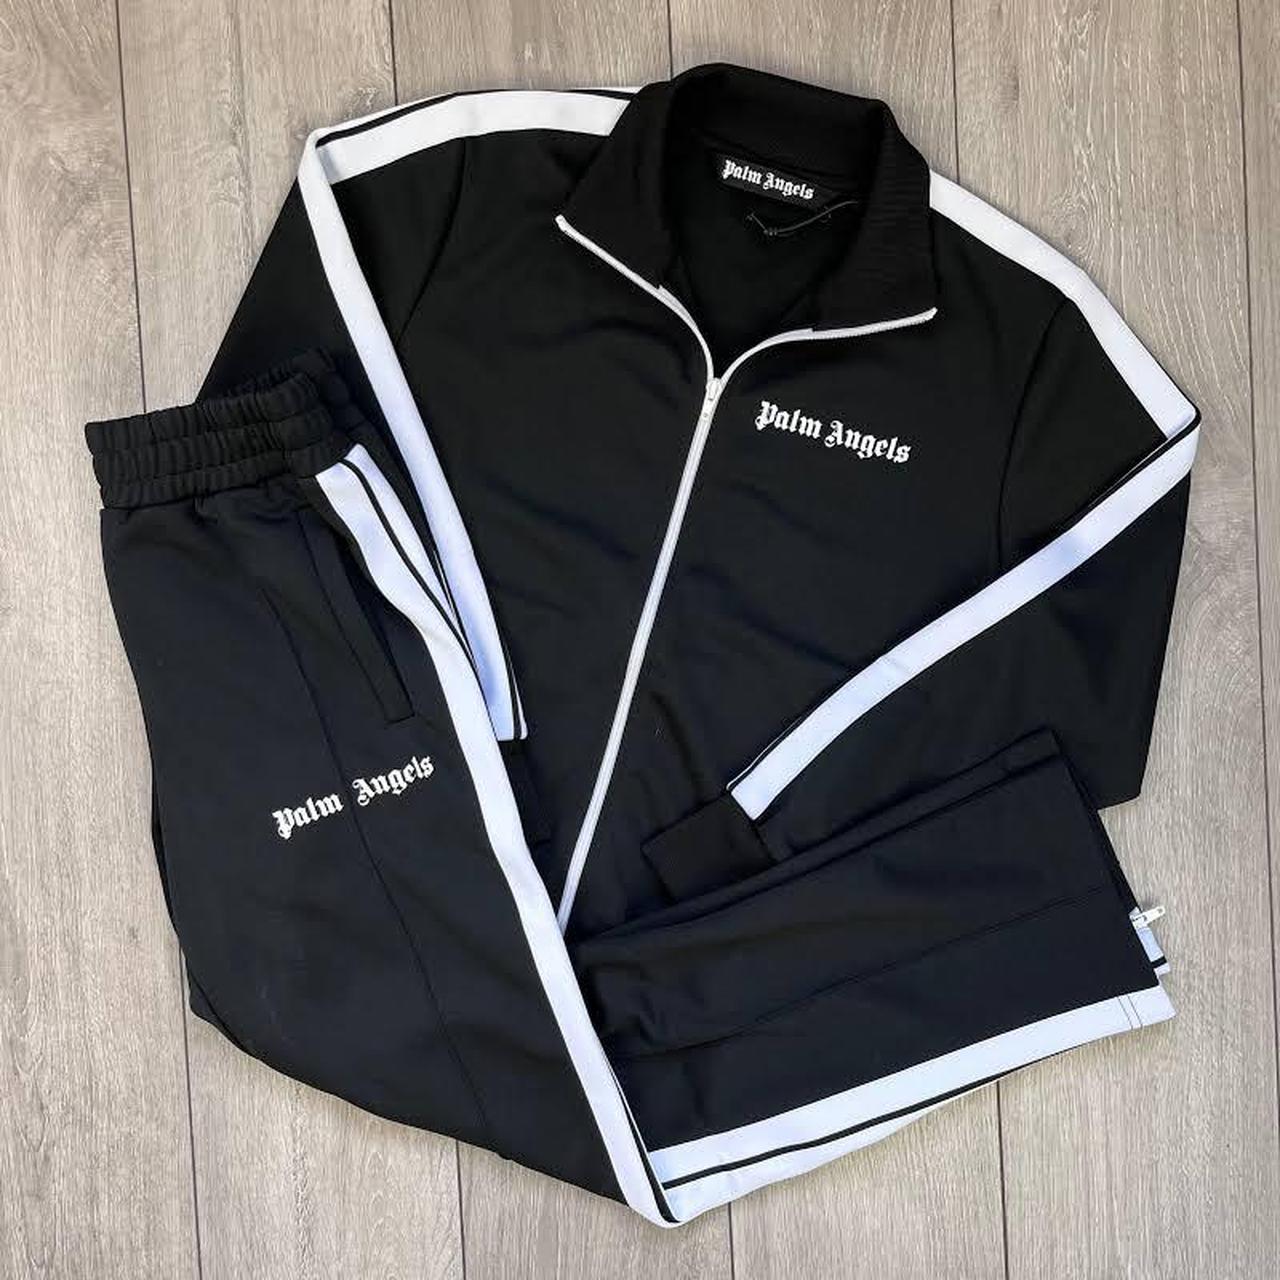 Palm Angels Men's Black and White Top | Depop